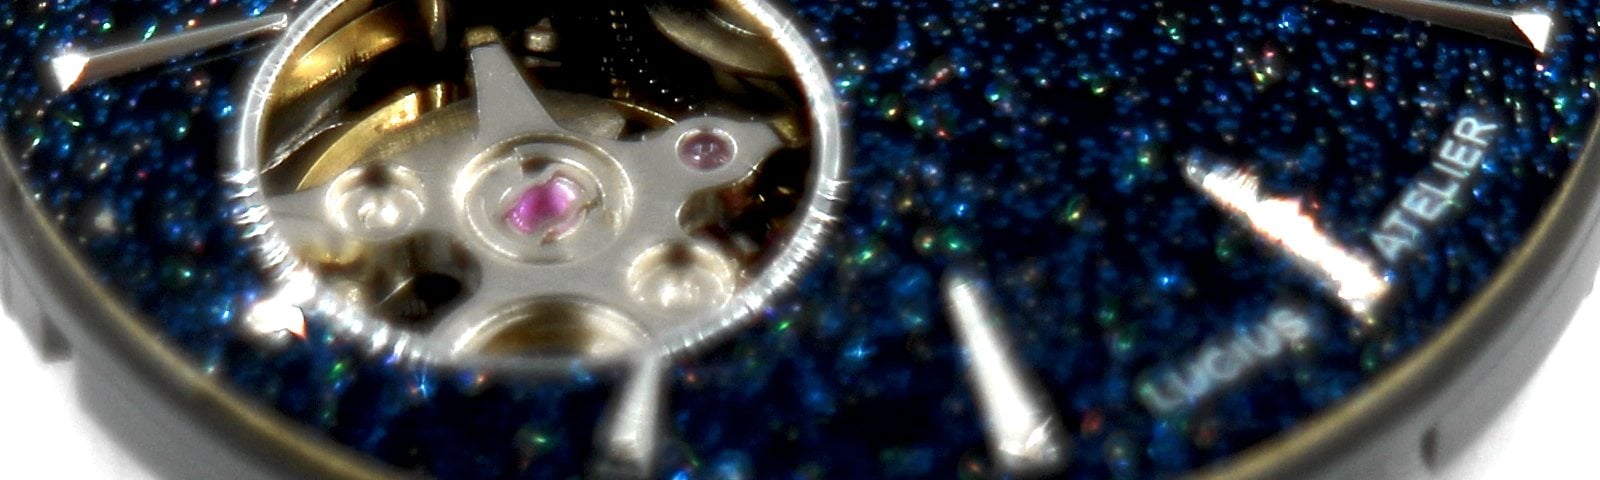 Stardust Dial v3 - Open Heart on a SEIKO NH38 Movement by Lucius Atelier